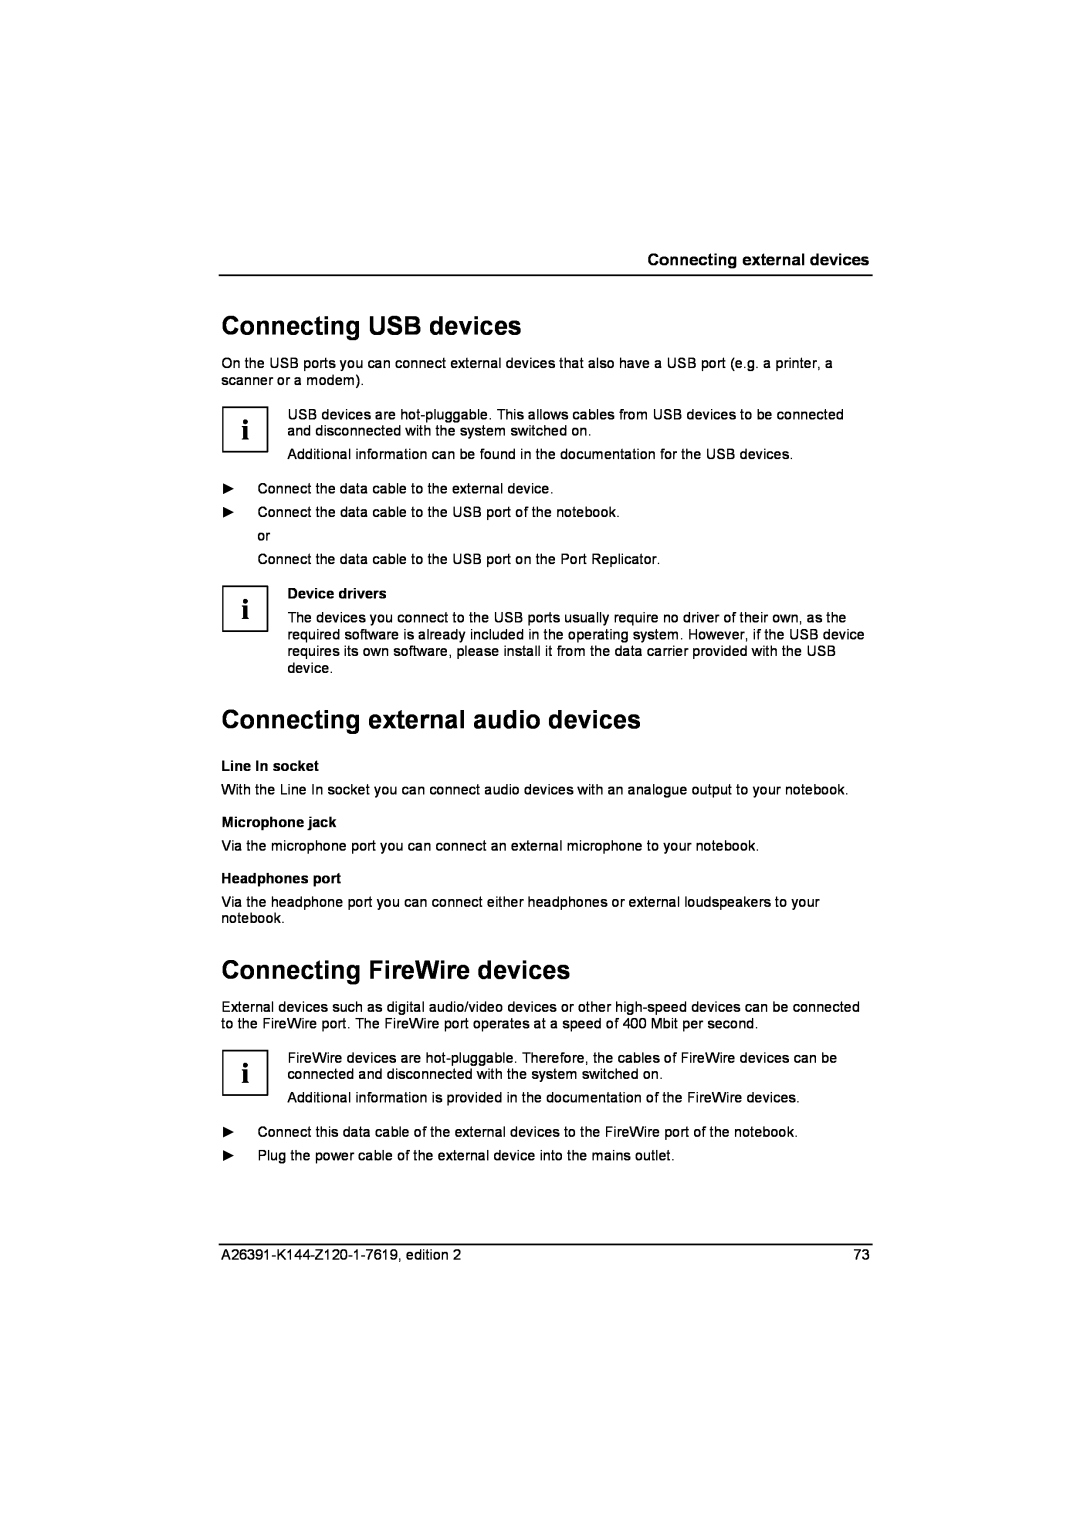 Fujitsu S SERIES Connecting USB devices, Connecting external audio devices, Connecting FireWire devices, Device drivers 